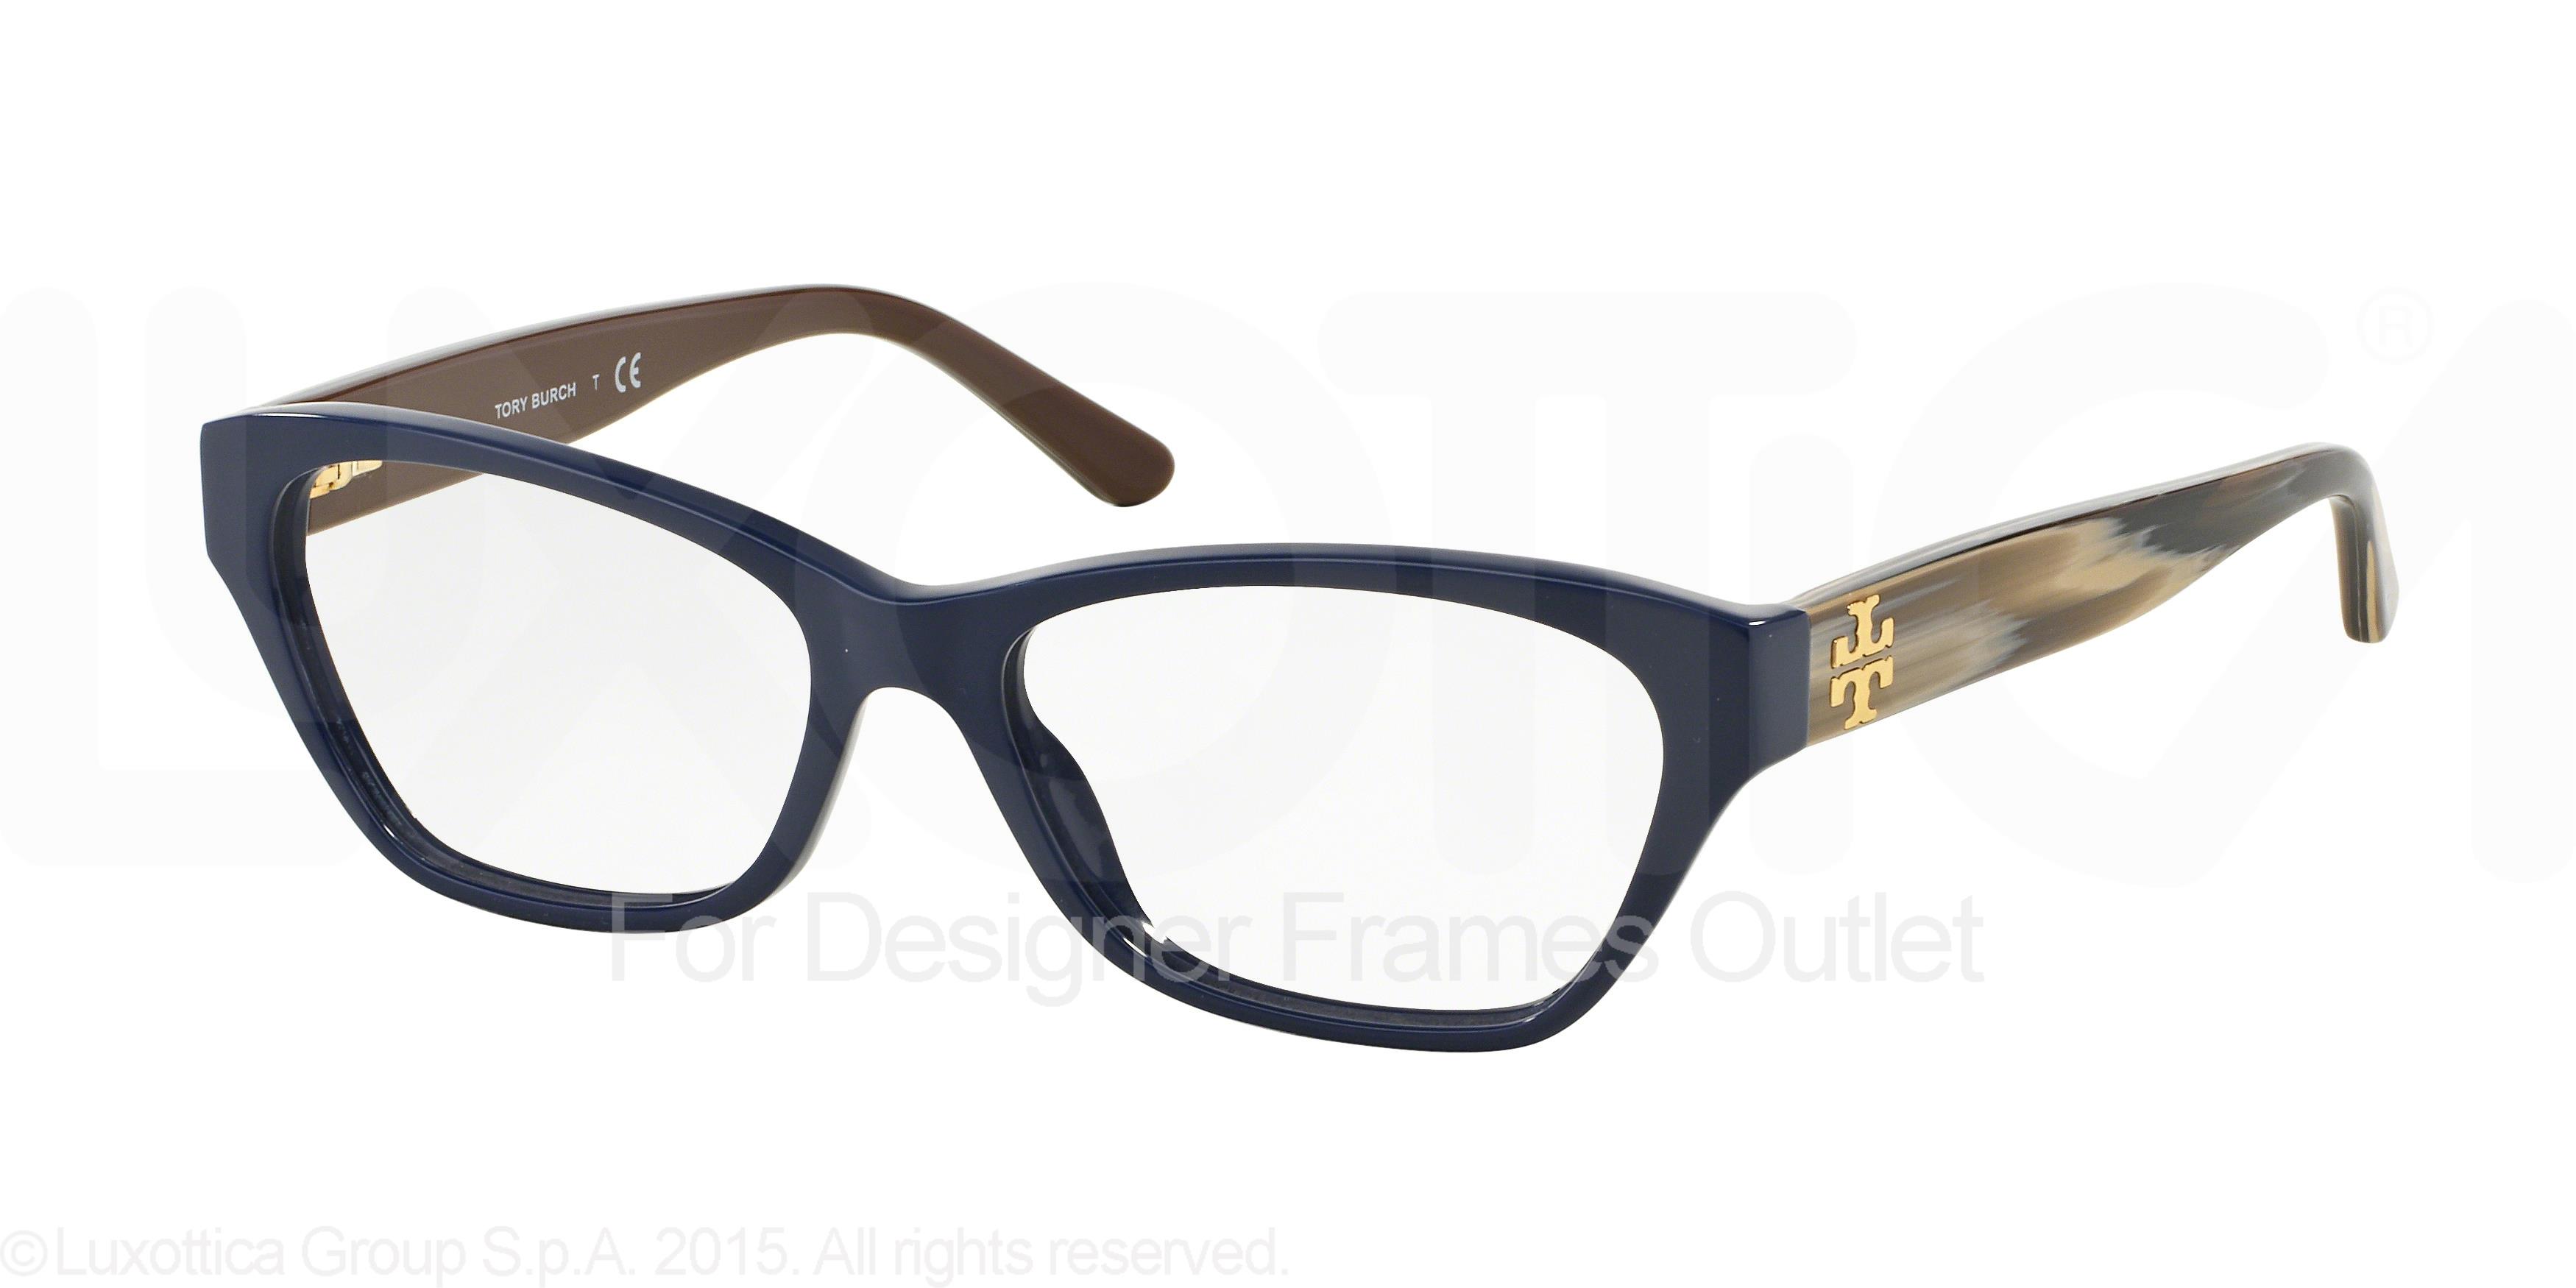 Picture of Tory Burch Eyeglasses TY2053A